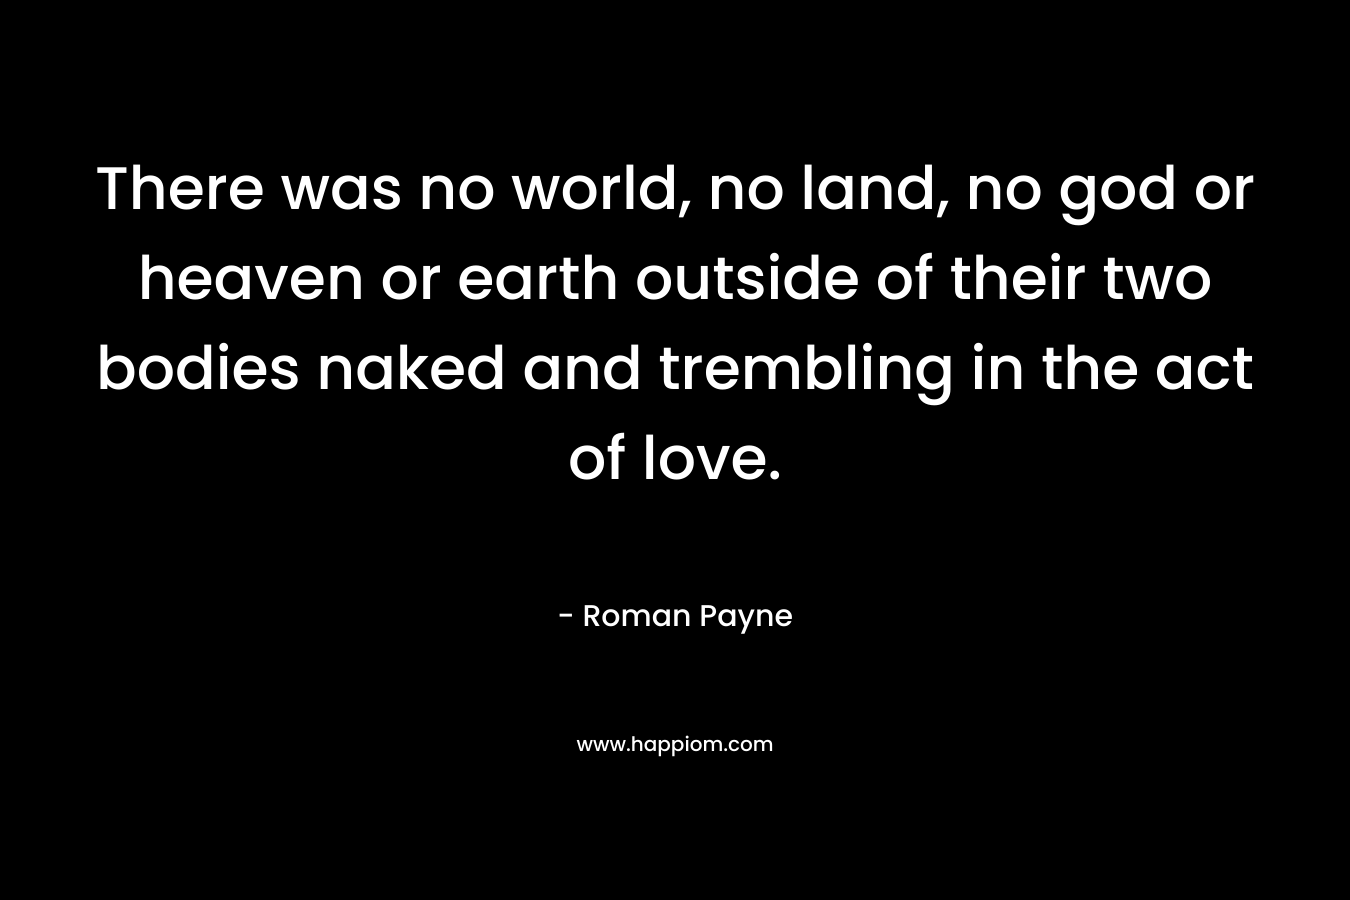 There was no world, no land, no god or heaven or earth outside of their two bodies naked and trembling in the act of love. – Roman Payne